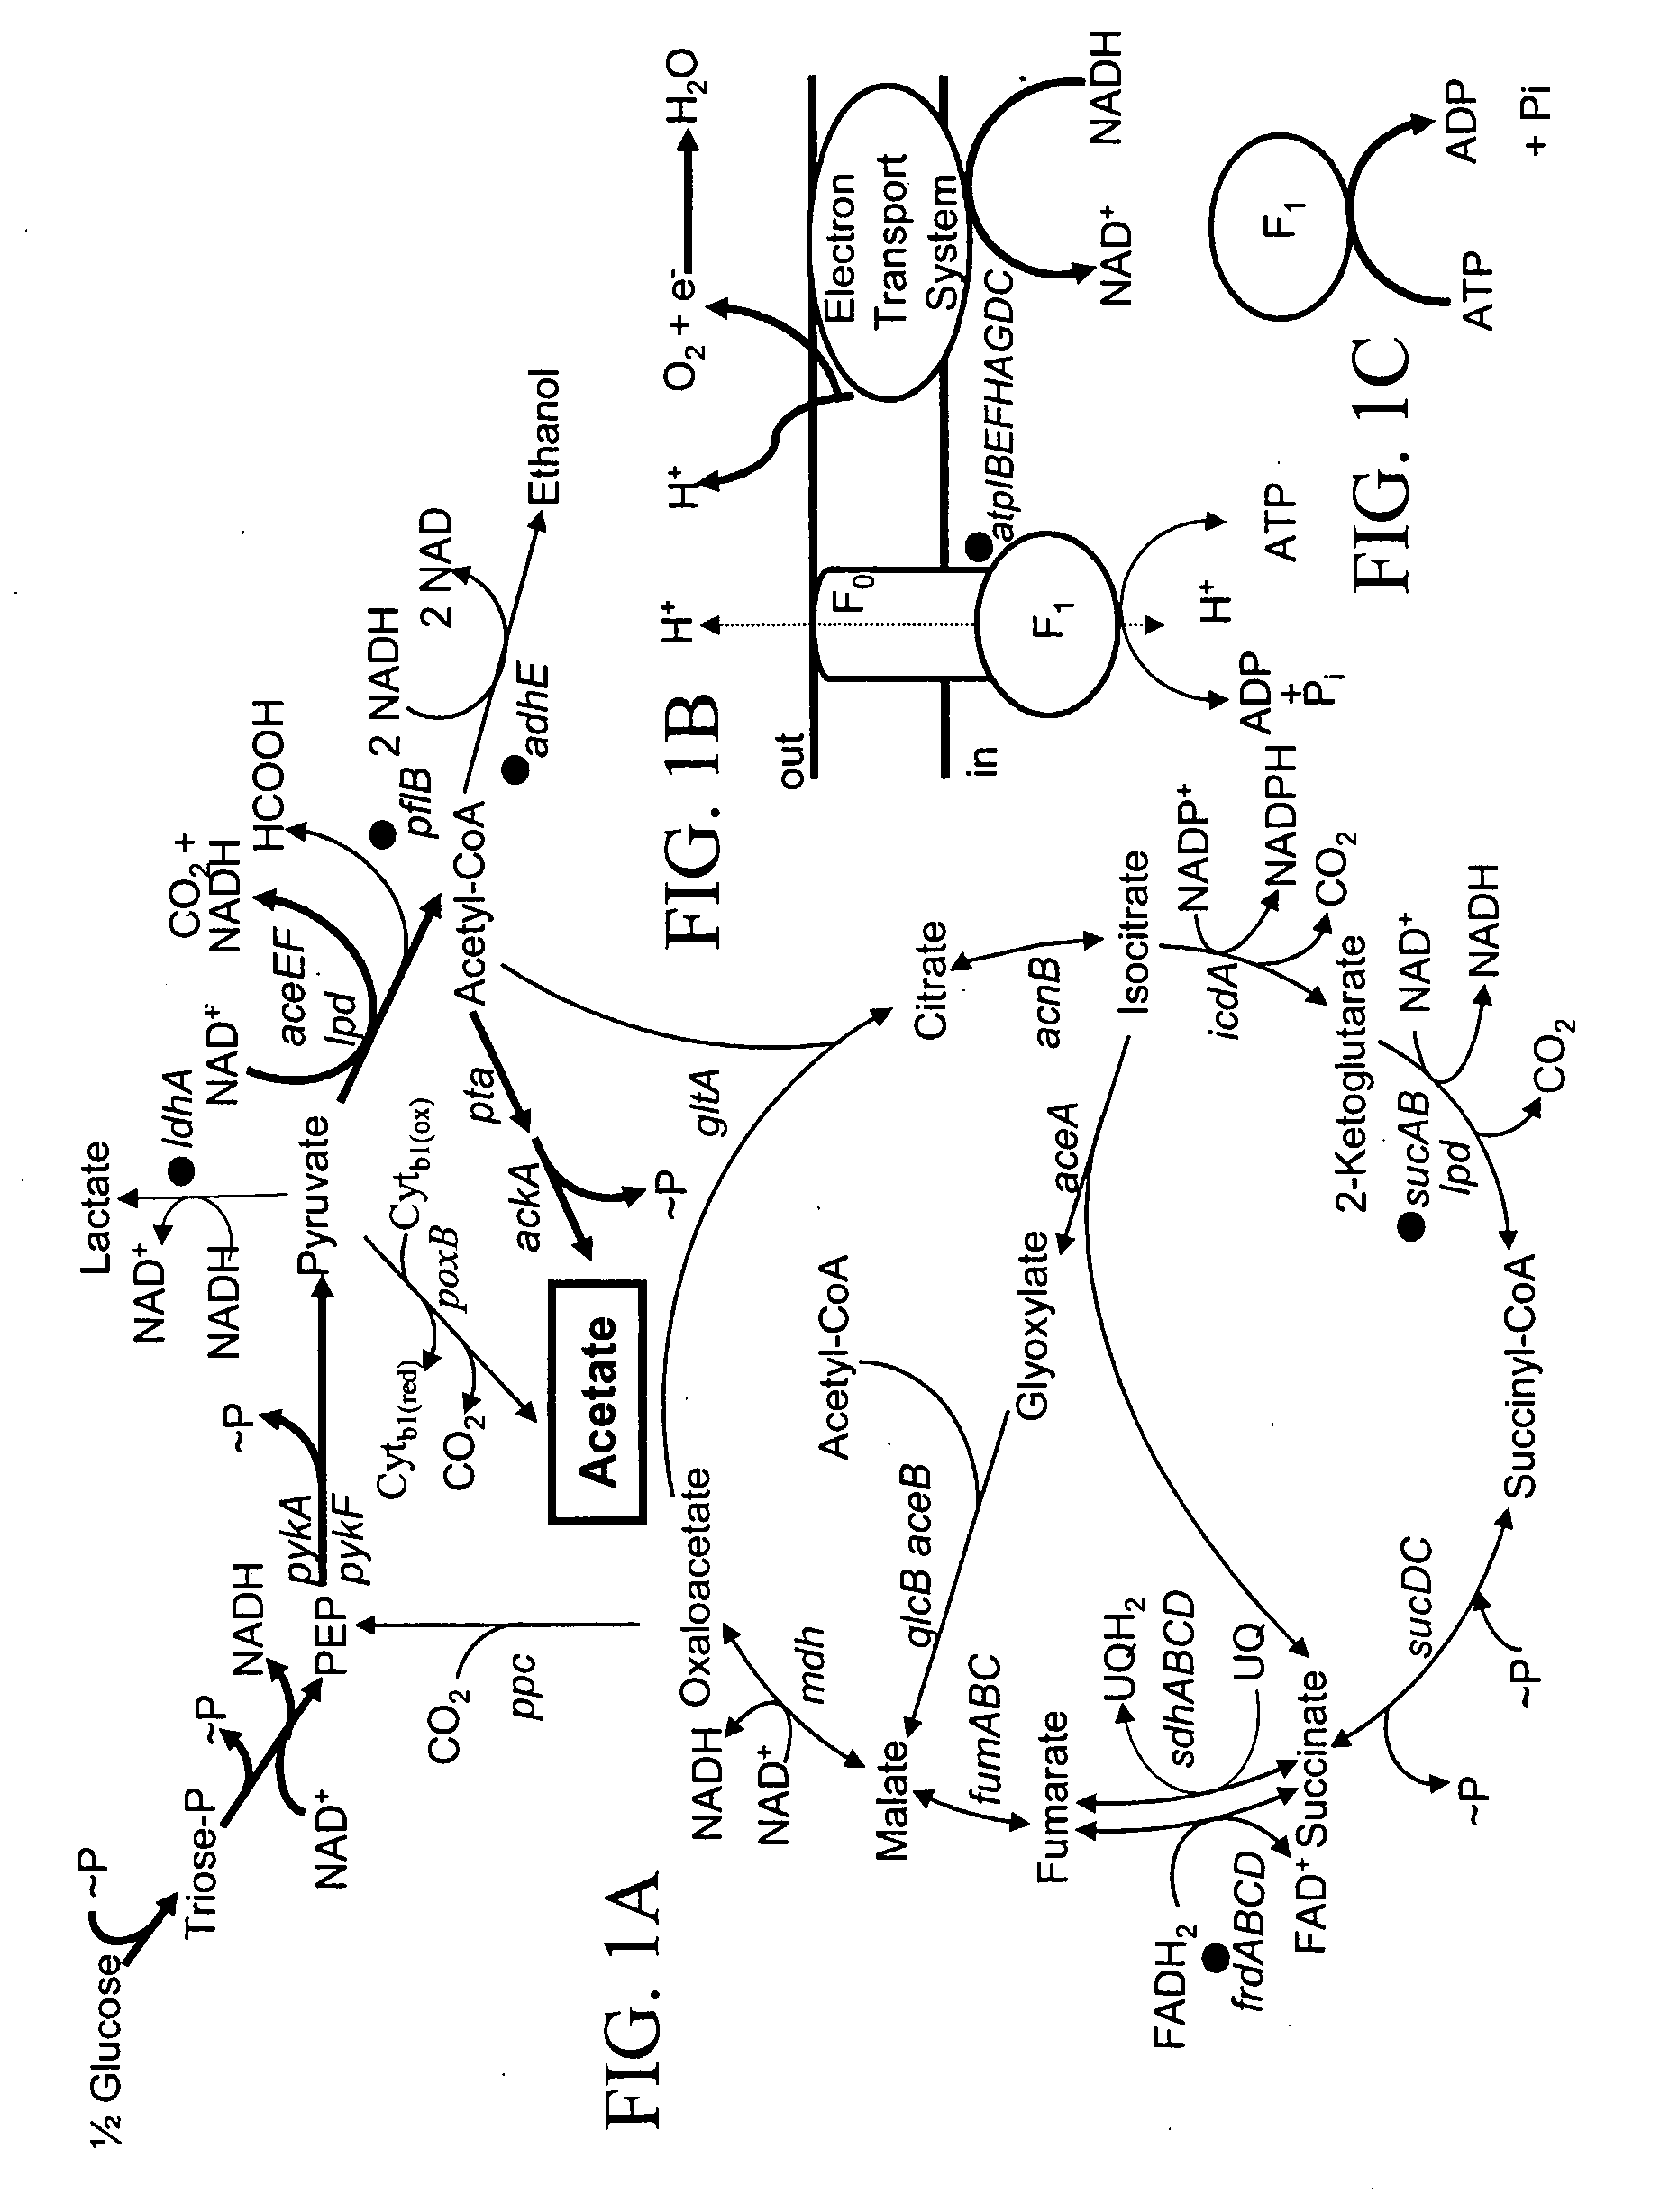 Materials and methods for the efficient production of acetate and other products